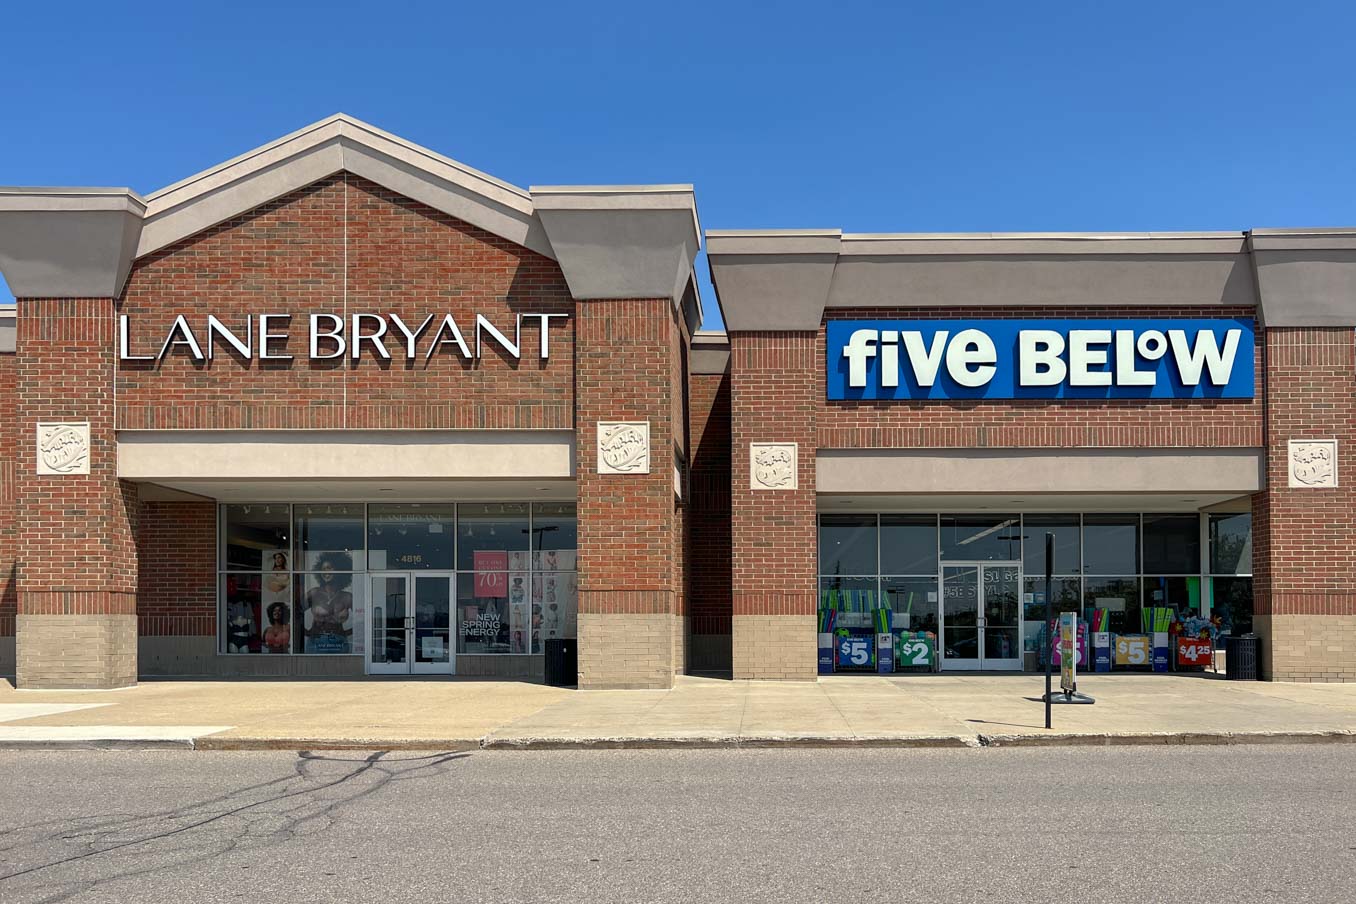 Lane Bryant and Five Below storefronts